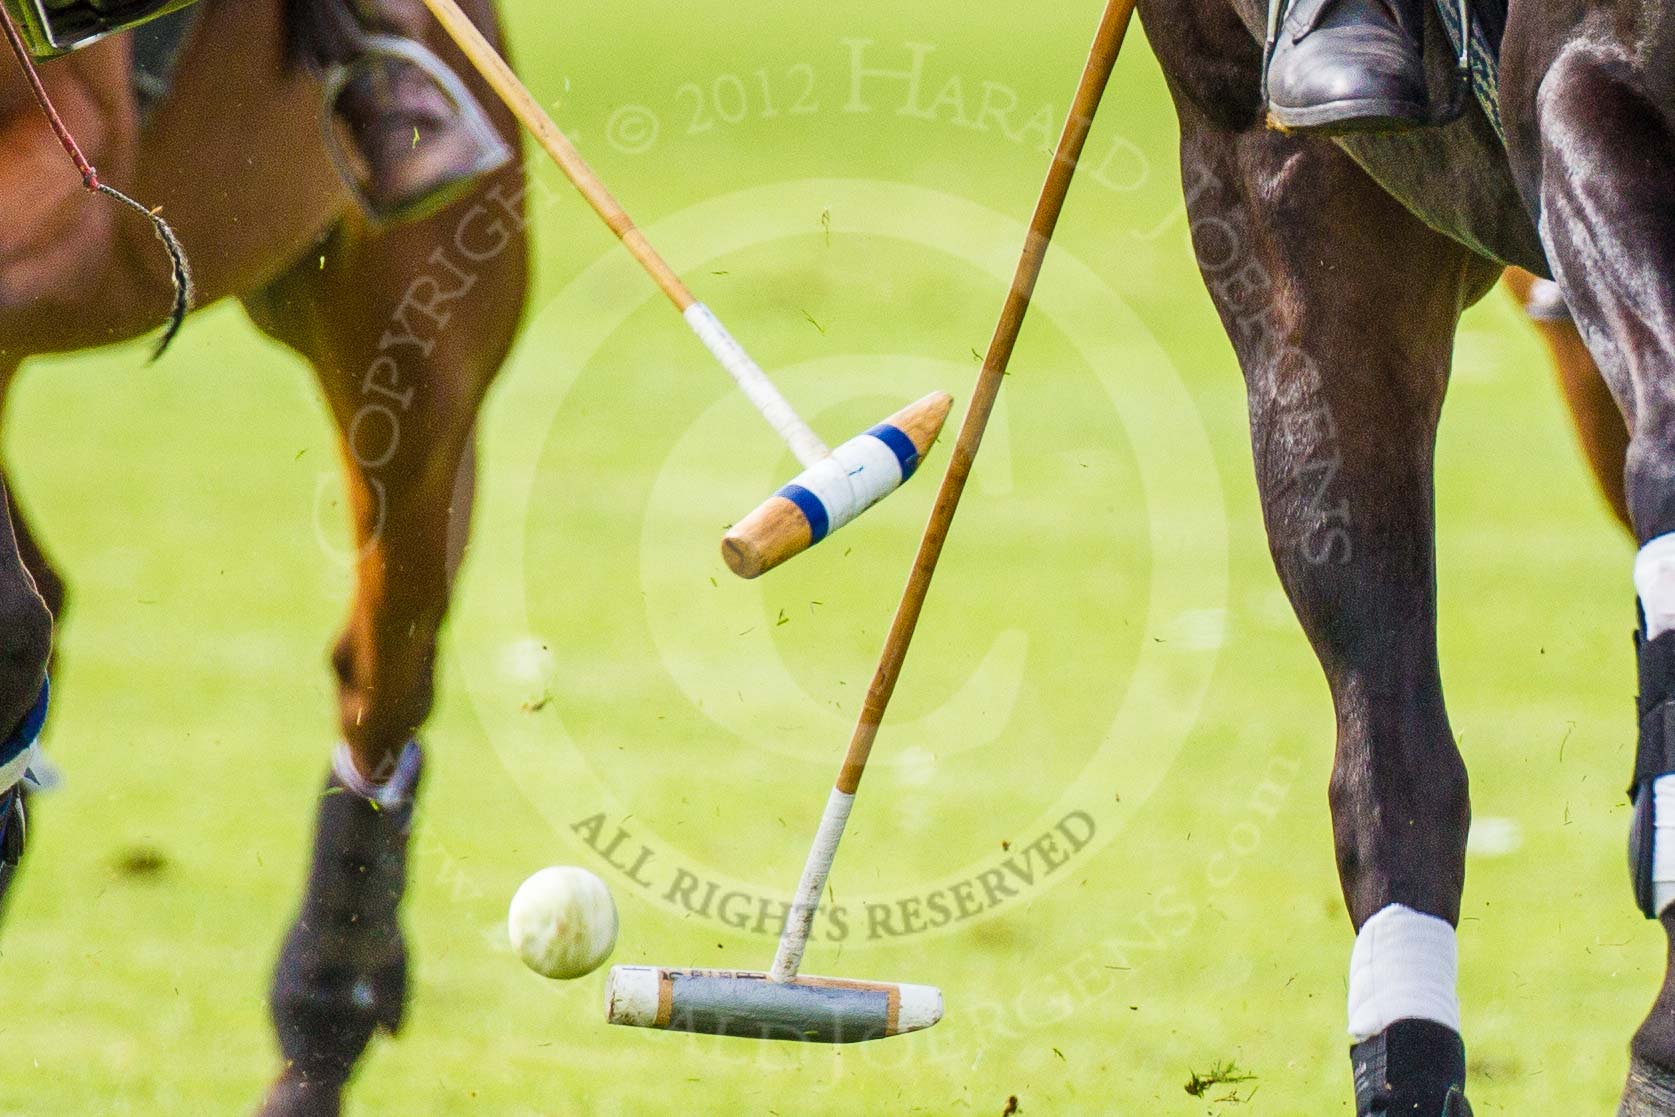 DBPC Polo in the Park 2012: Close-up Polo action with two mallets, a whip and a ball..
Dallas Burston Polo Club,
Stoneythorpe Estate,
Southam,
Warwickshire,
United Kingdom,
on 16 September 2012 at 11:57, image #113